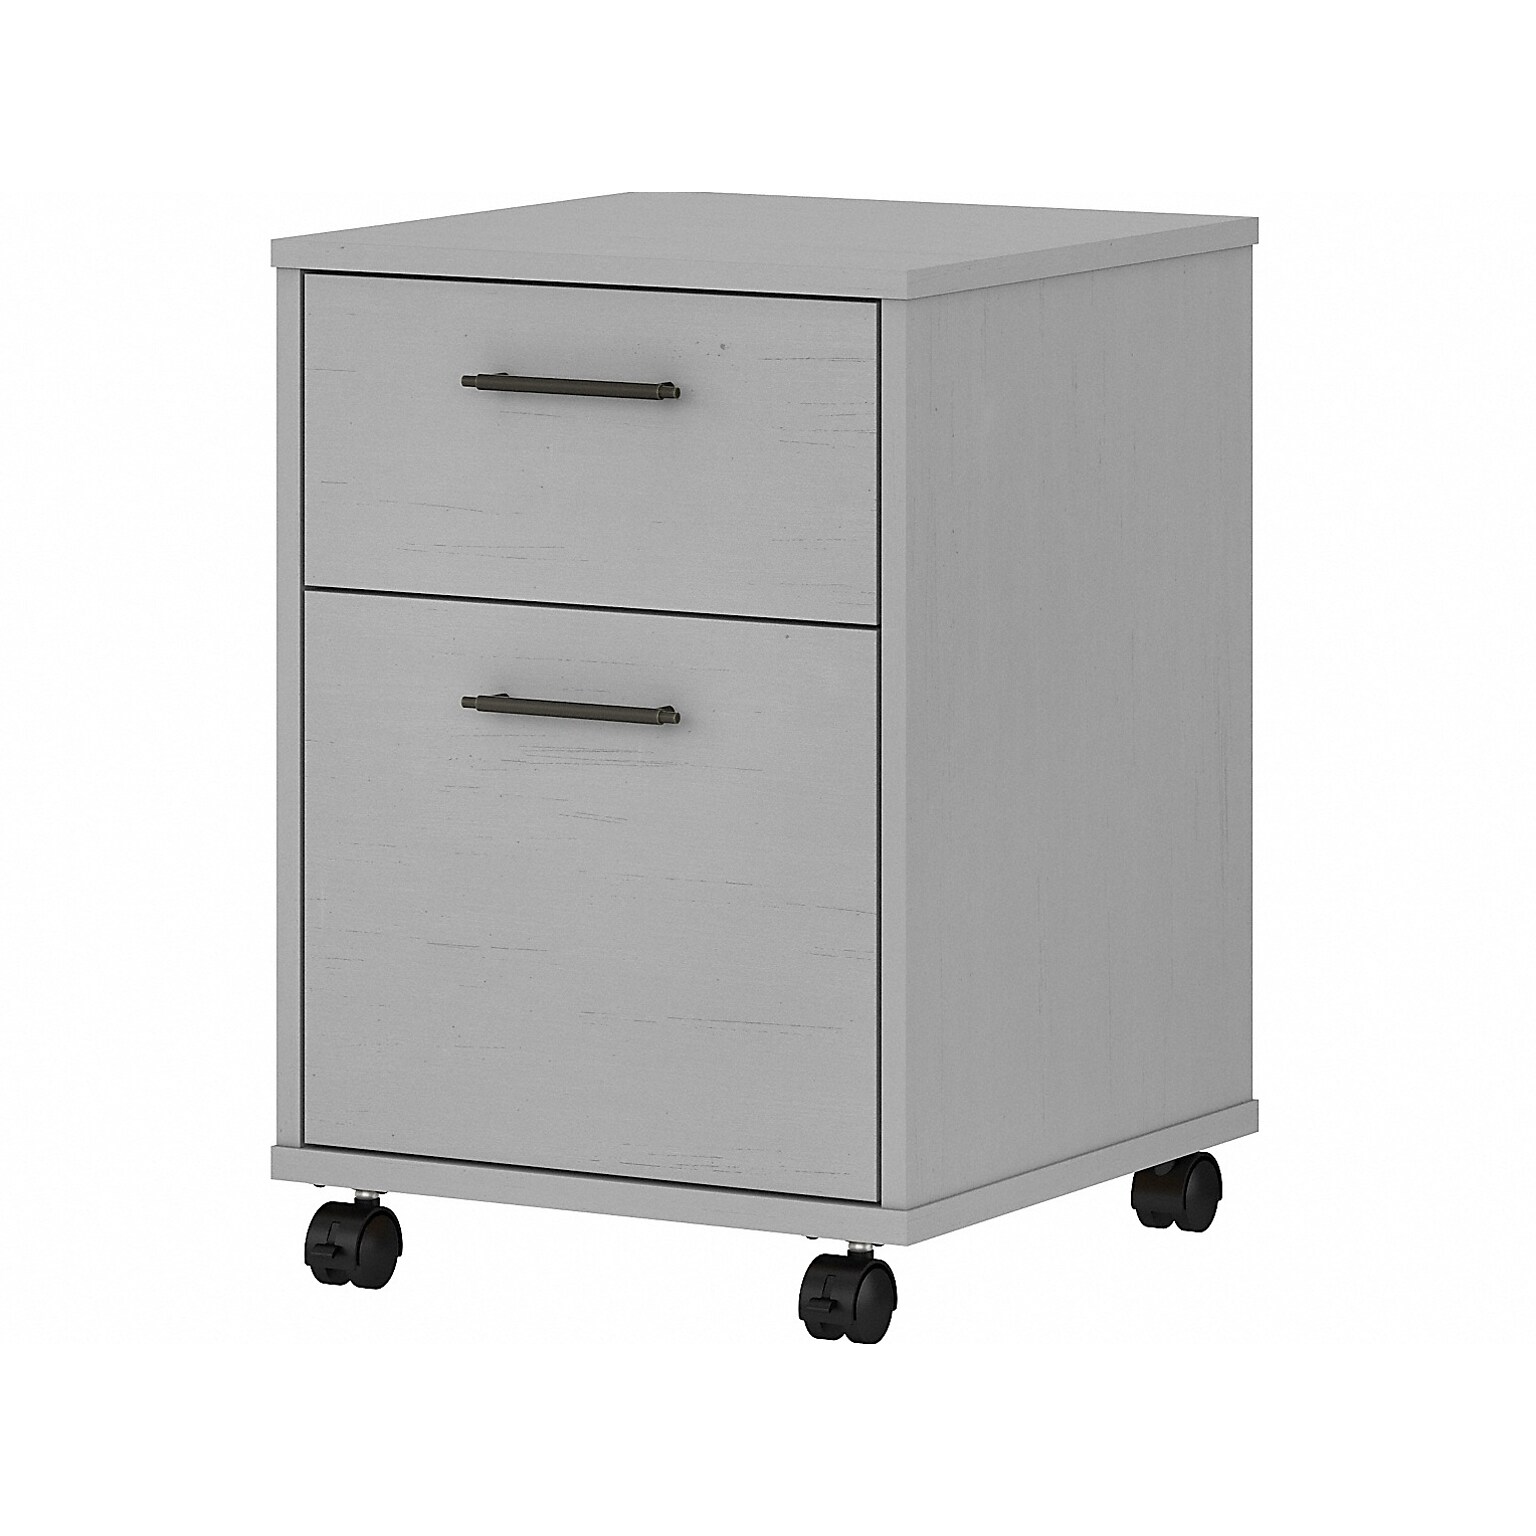 Bush Furniture Key West 2-Drawer Mobile Lateral File Cabinet, Letter/Legal Size, Cape Cod Gray (KWF116CG-03)